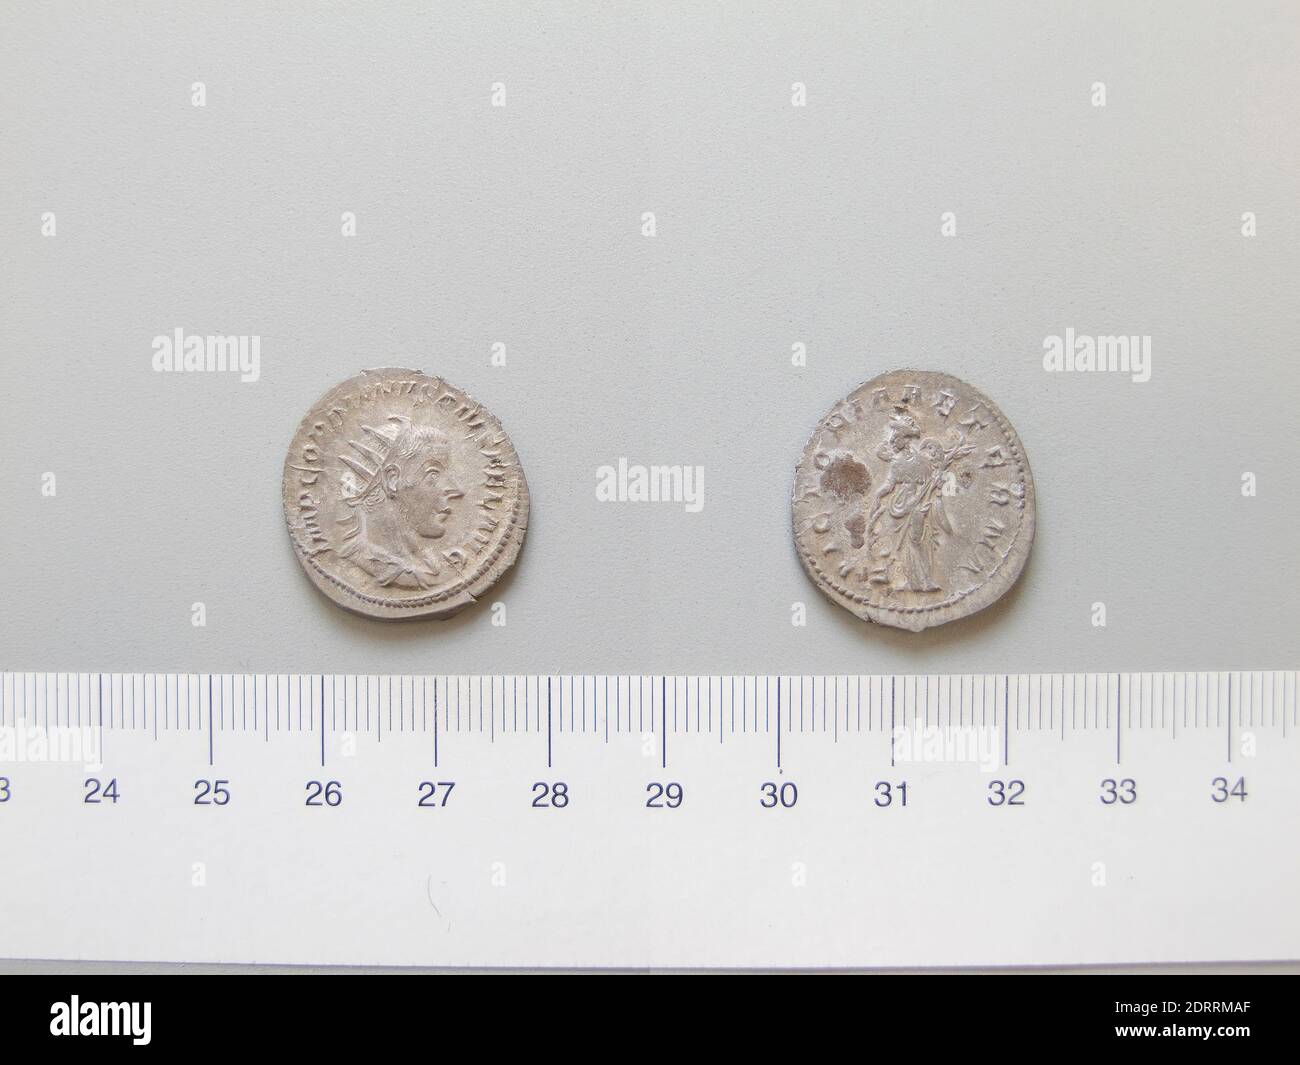 Ruler: Gordian III, Emperor of Rome, 225–244, ruled 238–44, Mint: Rome, Antoninianus of Gordian III, Emperor of Rome from Rome, 242, Silver, 3.78 g, 12:00, 23 mm, Made in Rome, Italy, Roman, 3rd century, Numismatics Stock Photo